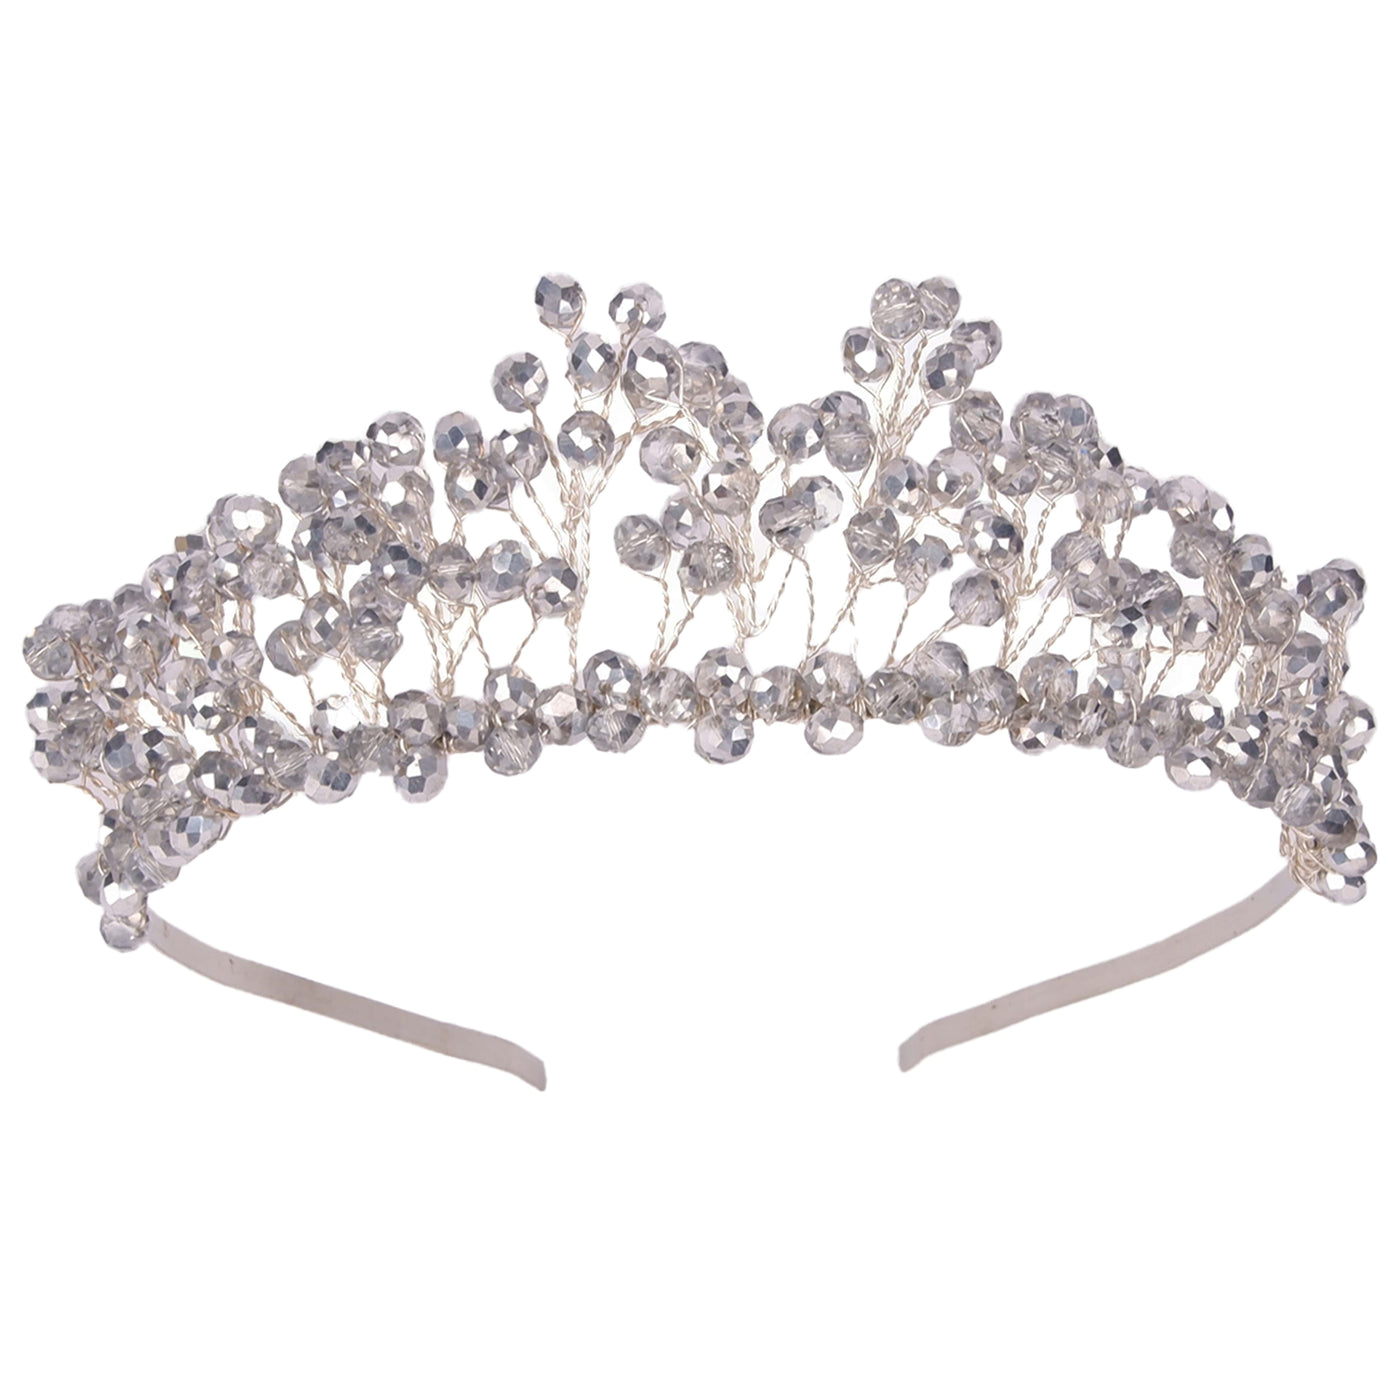 Lightweight Bridal Crown with Crystal Beads Wedding Crown for Bridesmaids